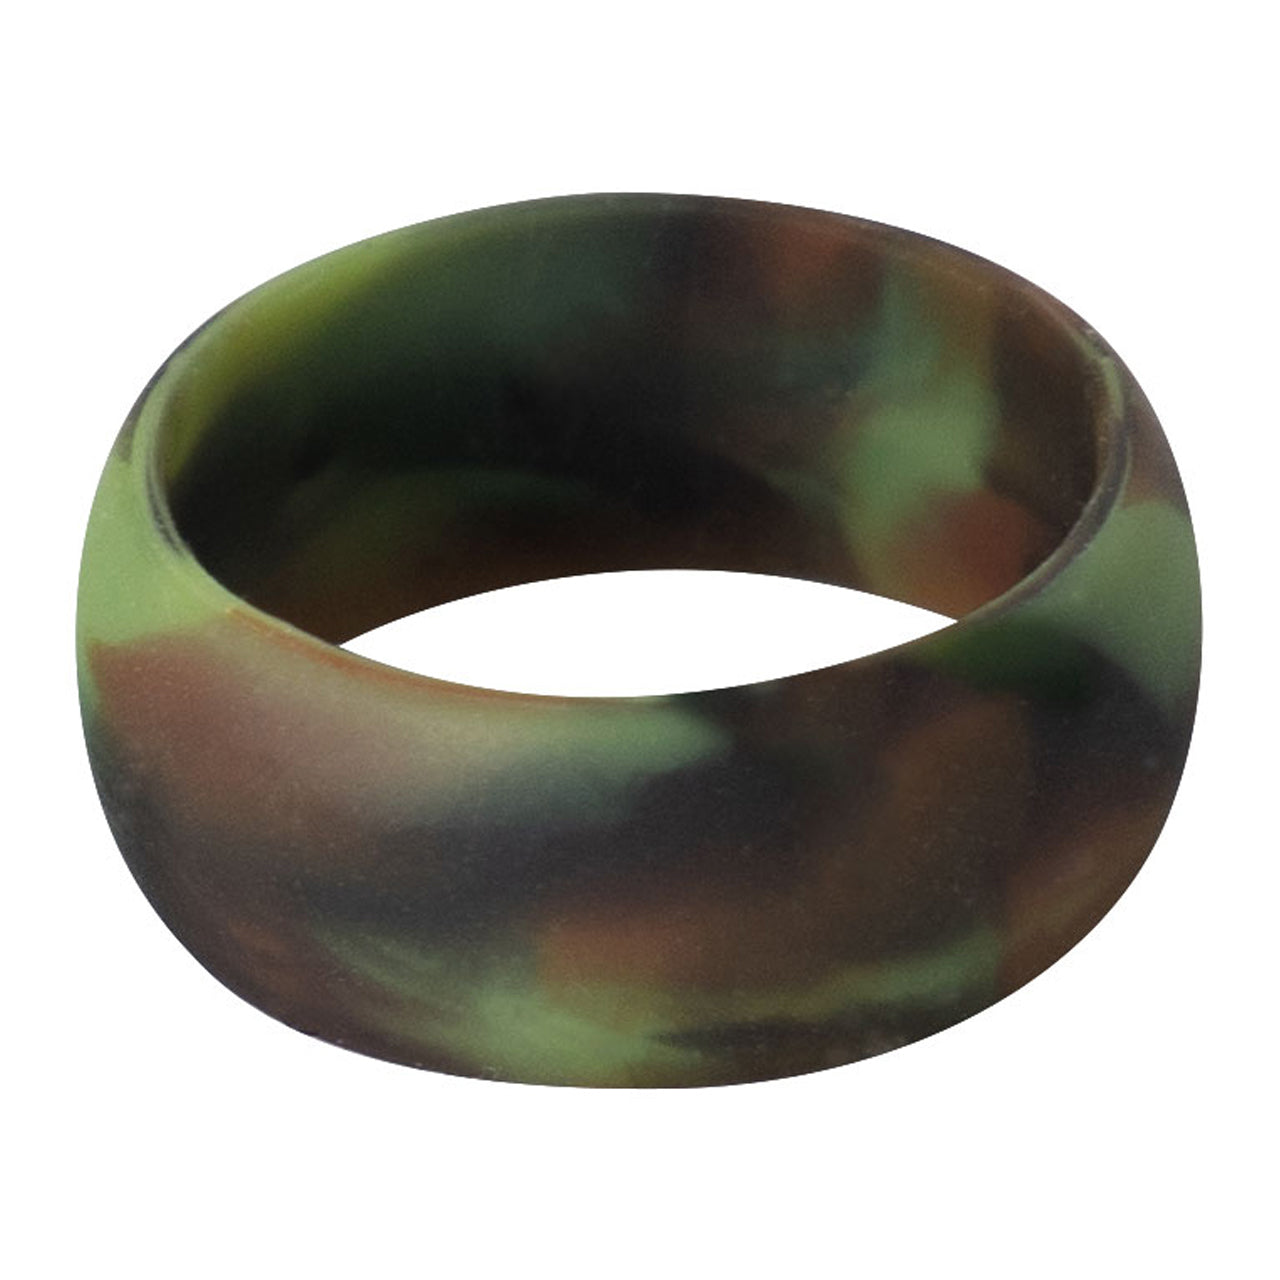 Silicone Ring is ideal for military and law enforcement professionals looking to prevent finger injuries caused by wearing a ring. www.moralepatches.com.au